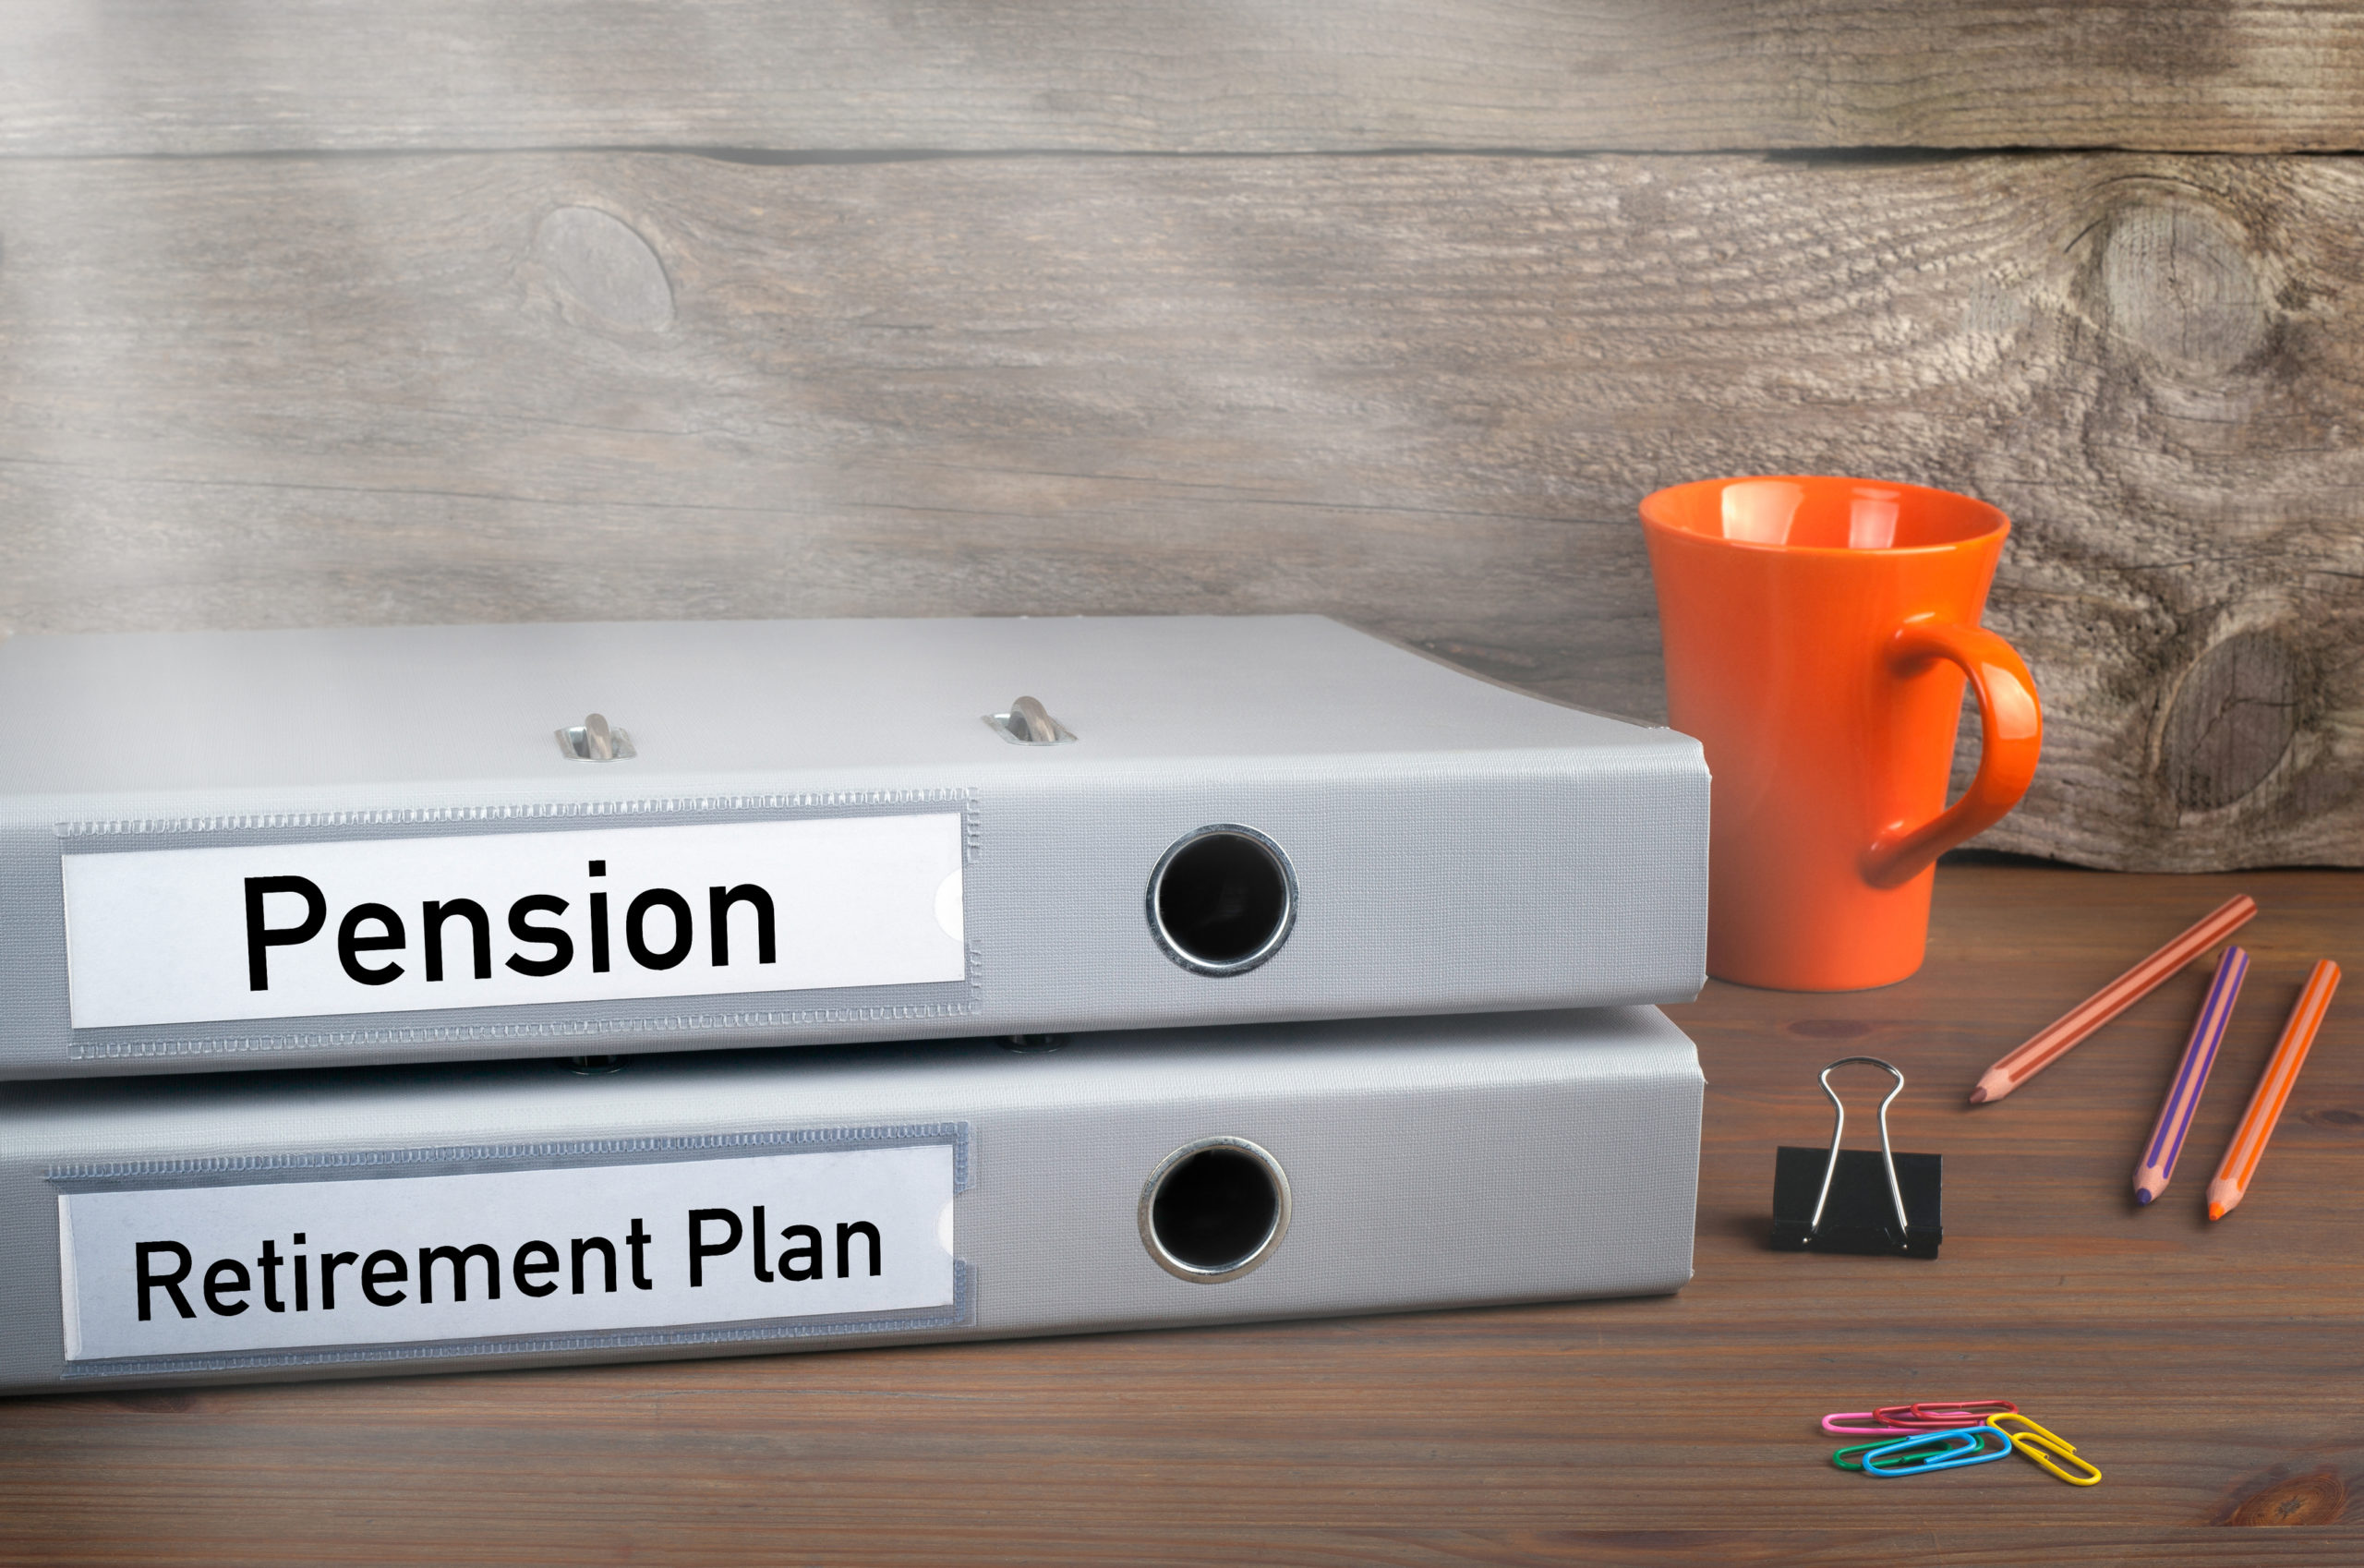 Public Pension Systems Need to Revisit and Clarify Their Objectives